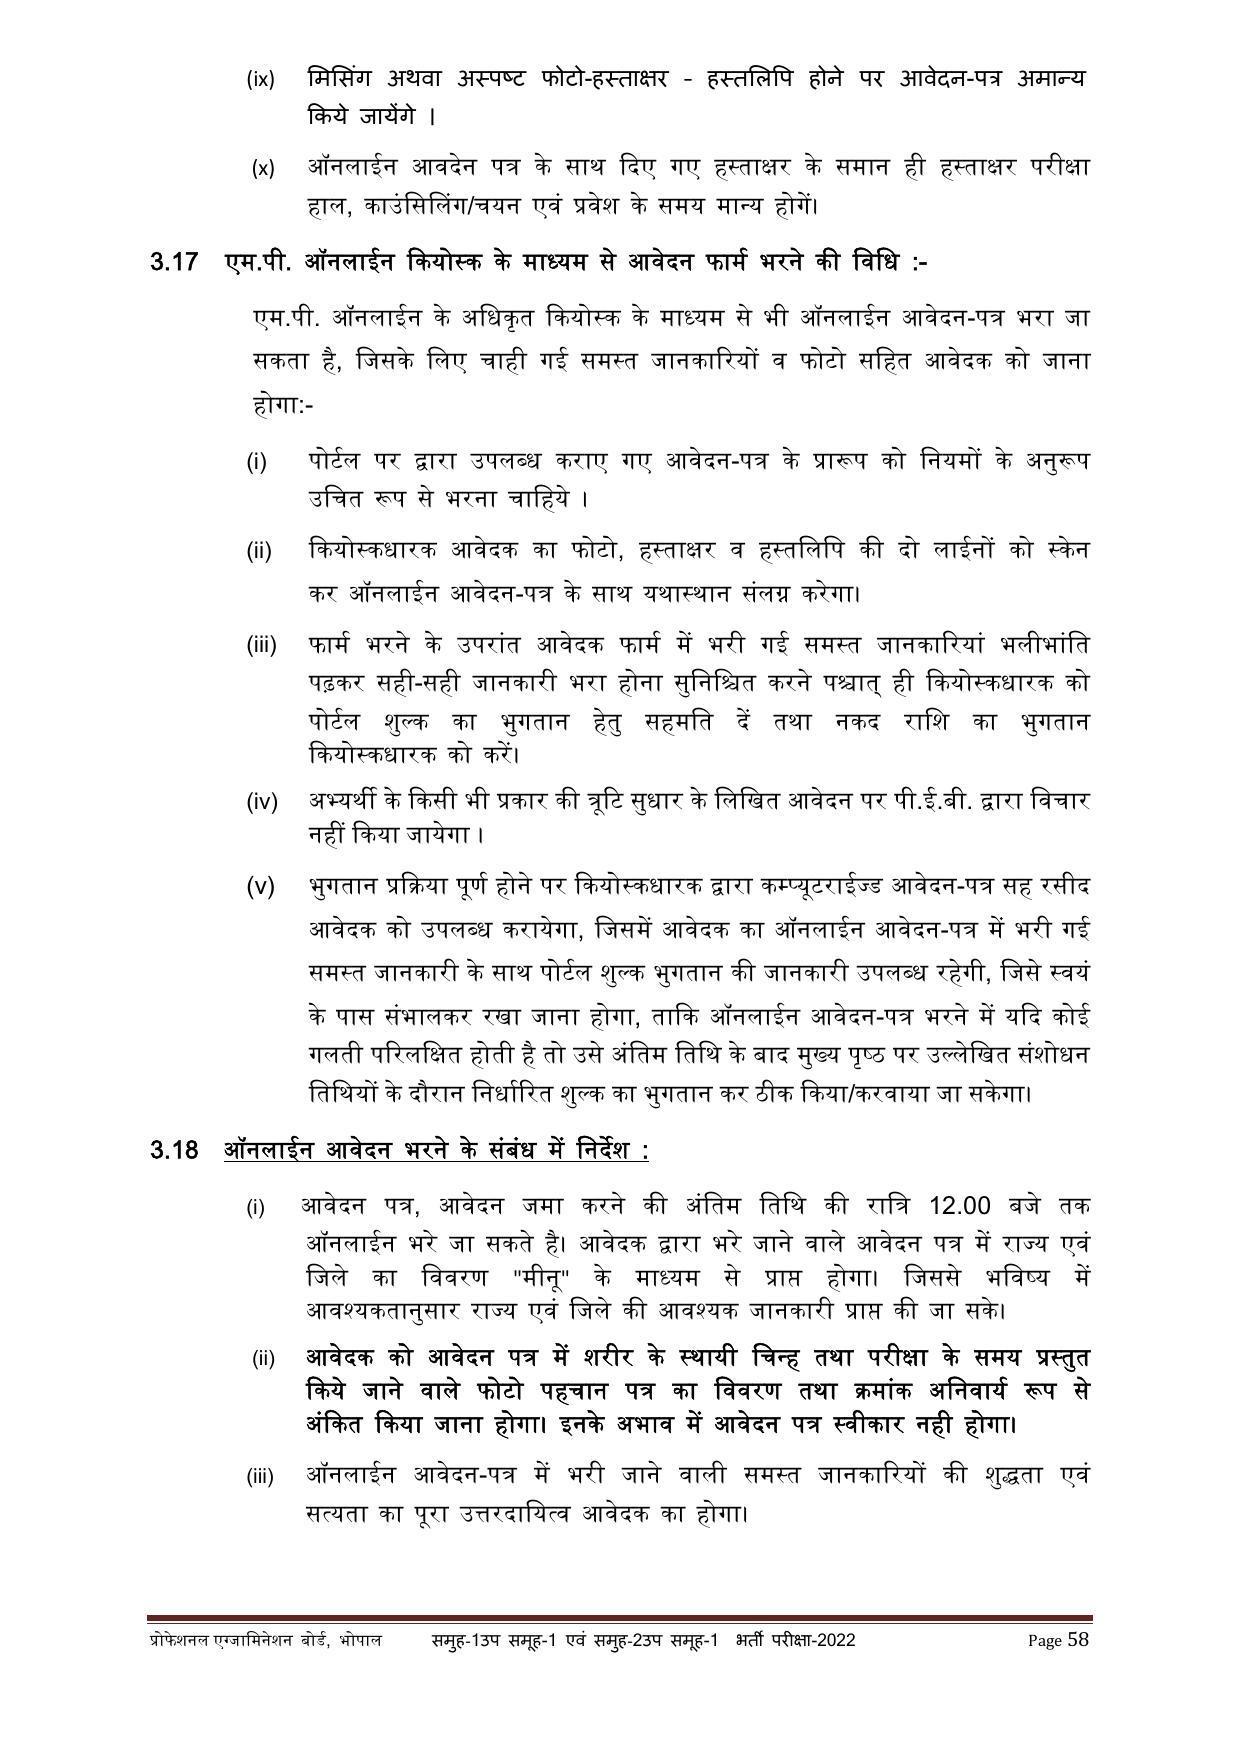 MPPEB Group-I Sub Group-I & Group-II Sub Group-I Recruitment 2022 - Page 14